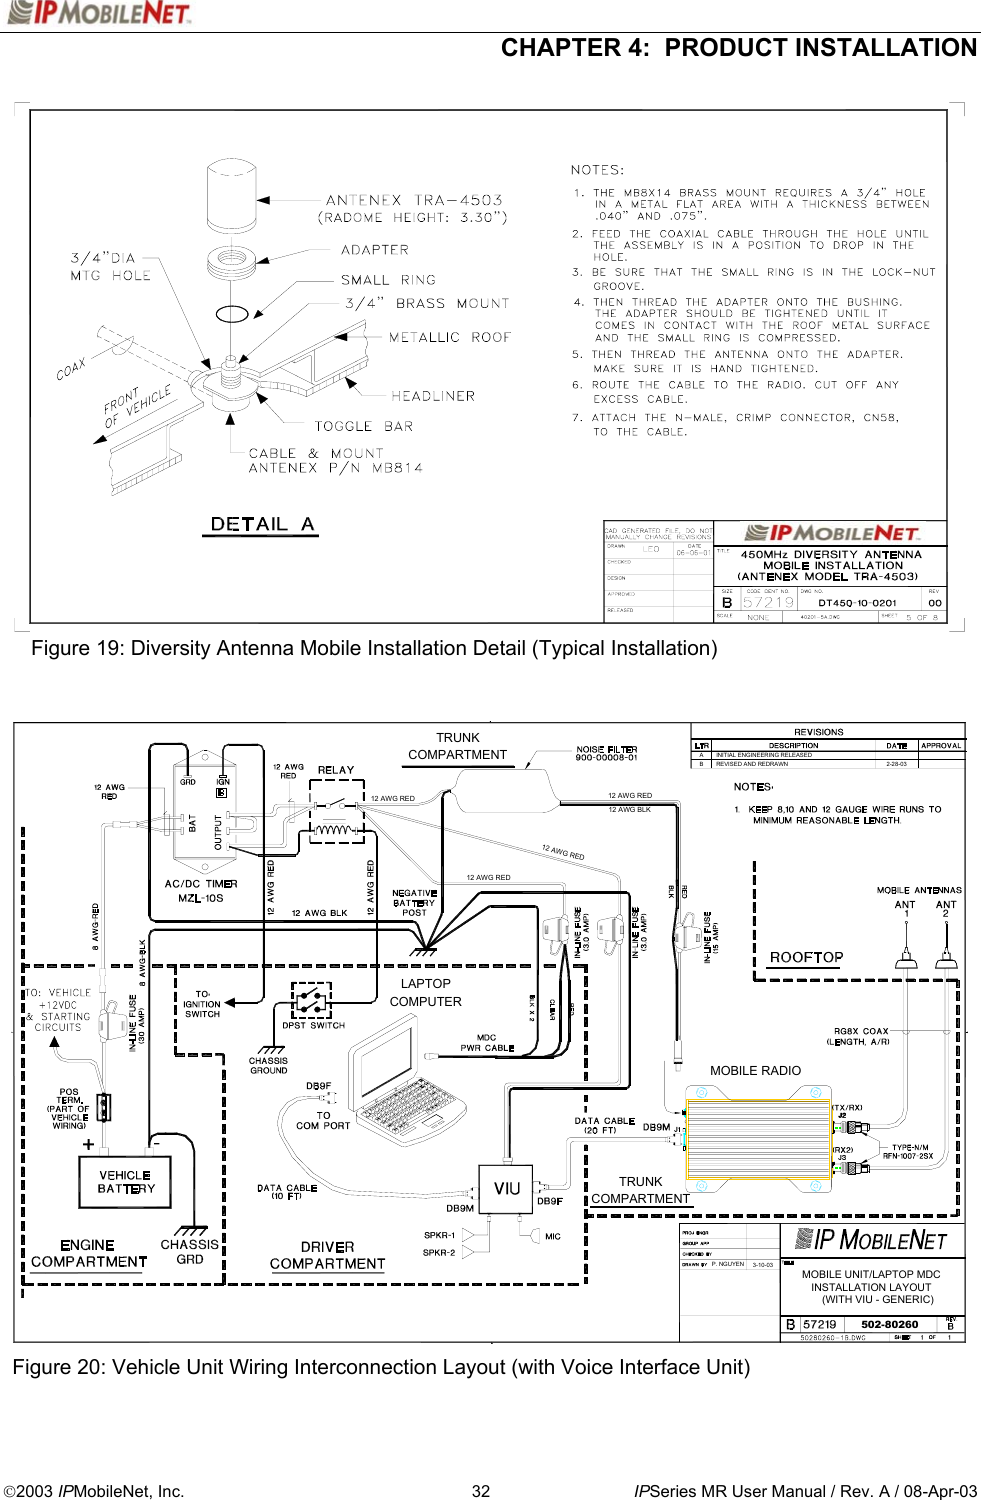  CHAPTER 4:  PRODUCT INSTALLATION  2003 IPMobileNet, Inc.  32  IPSeries MR User Manual / Rev. A / 08-Apr-03                          Figure 19: Diversity Antenna Mobile Installation Detail (Typical Installation)                                Figure 20: Vehicle Unit Wiring Interconnection Layout (with Voice Interface Unit)  COMPUTERCOMPARTMENTTRUNKLAPTOPTRUNKCOMPARTMENT INITIAL ENGINEERING RELEASEDA12 AWG REDMOBILE RADIOP. NGUYEN502-802603-10-03MOBILE UNIT/LAPTOP MDCINSTALLATION LAYOUT12 AWG REDREVISED AND REDRAWNB 2-28-03(WITH VIU - GENERIC)12 AWG RED12 AWG RED12 AWG BLK